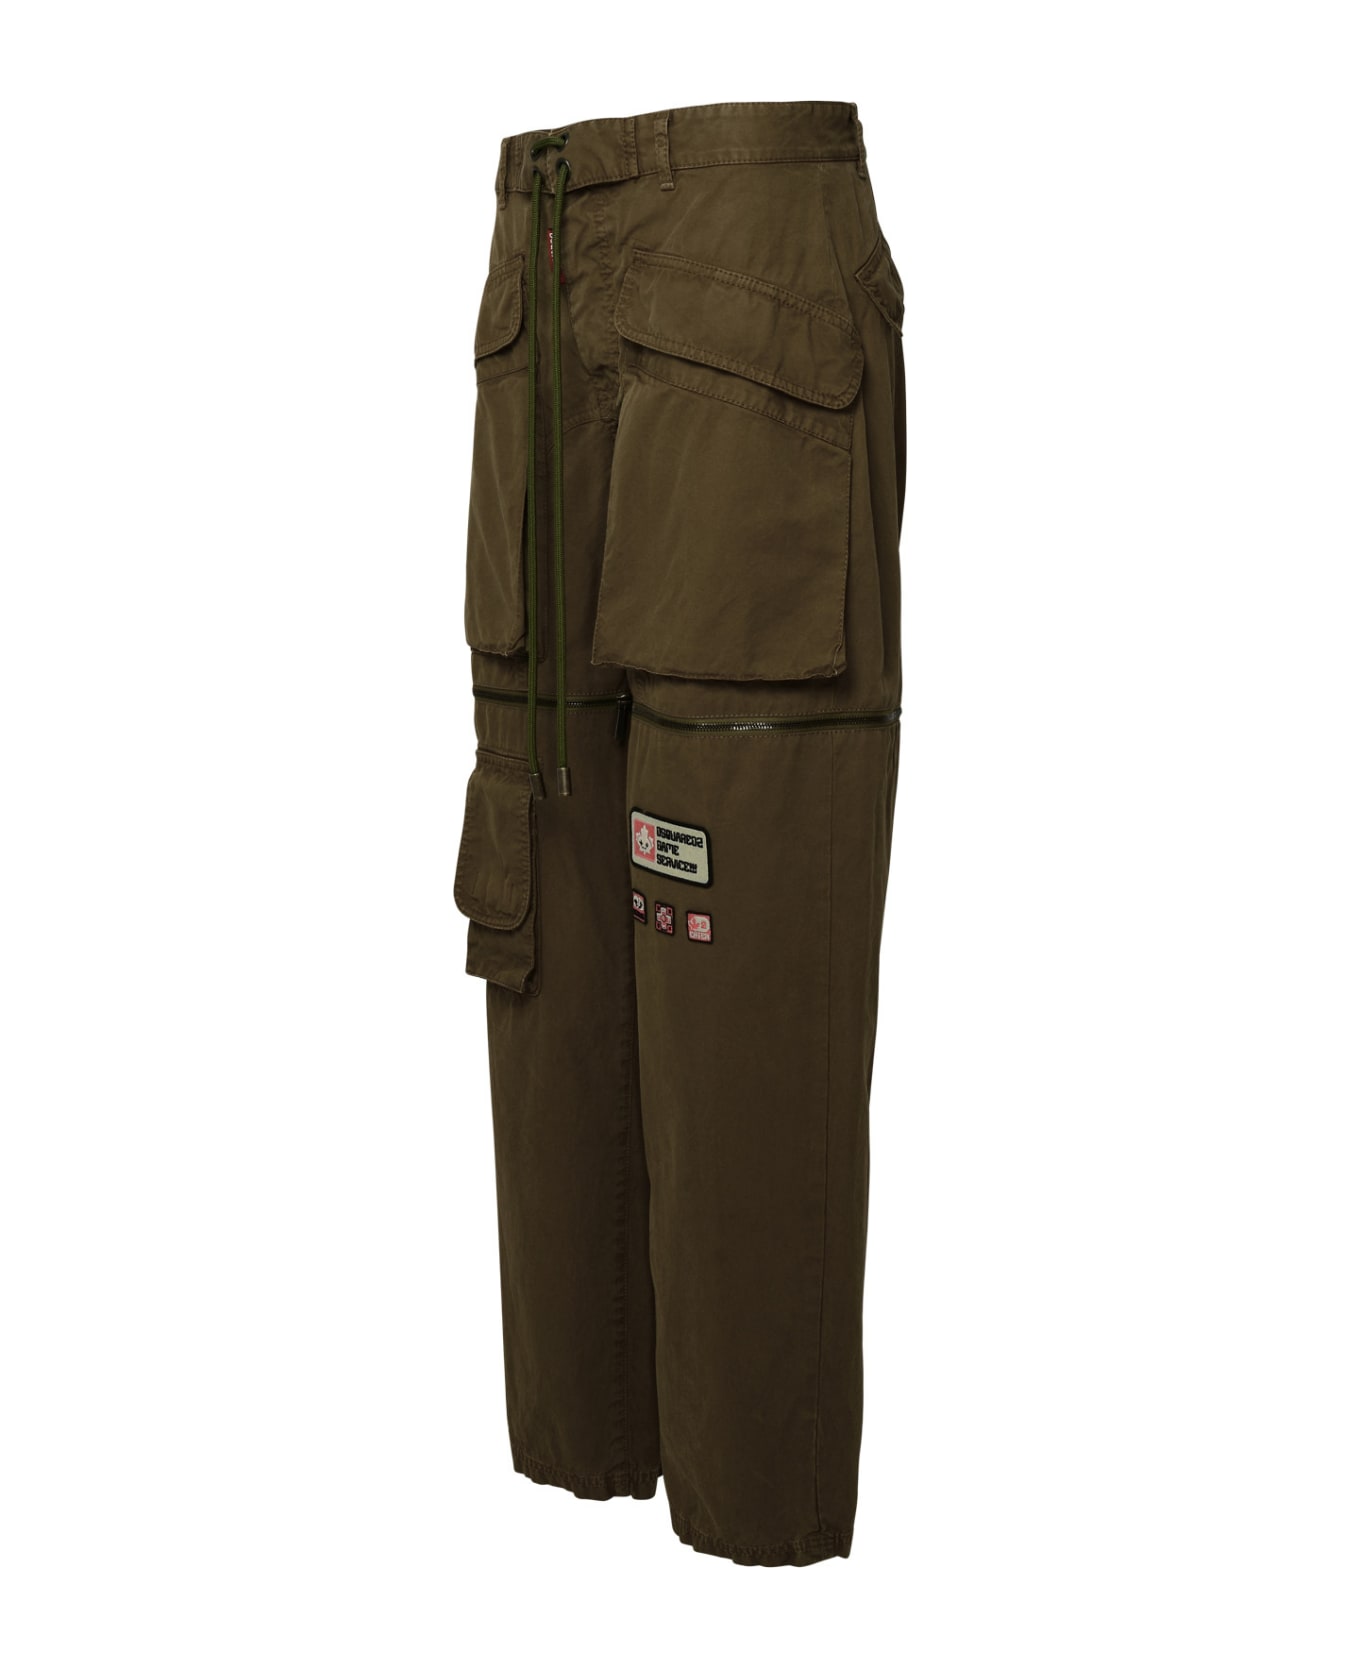 Dsquared2 Green Cotton Pants - Green